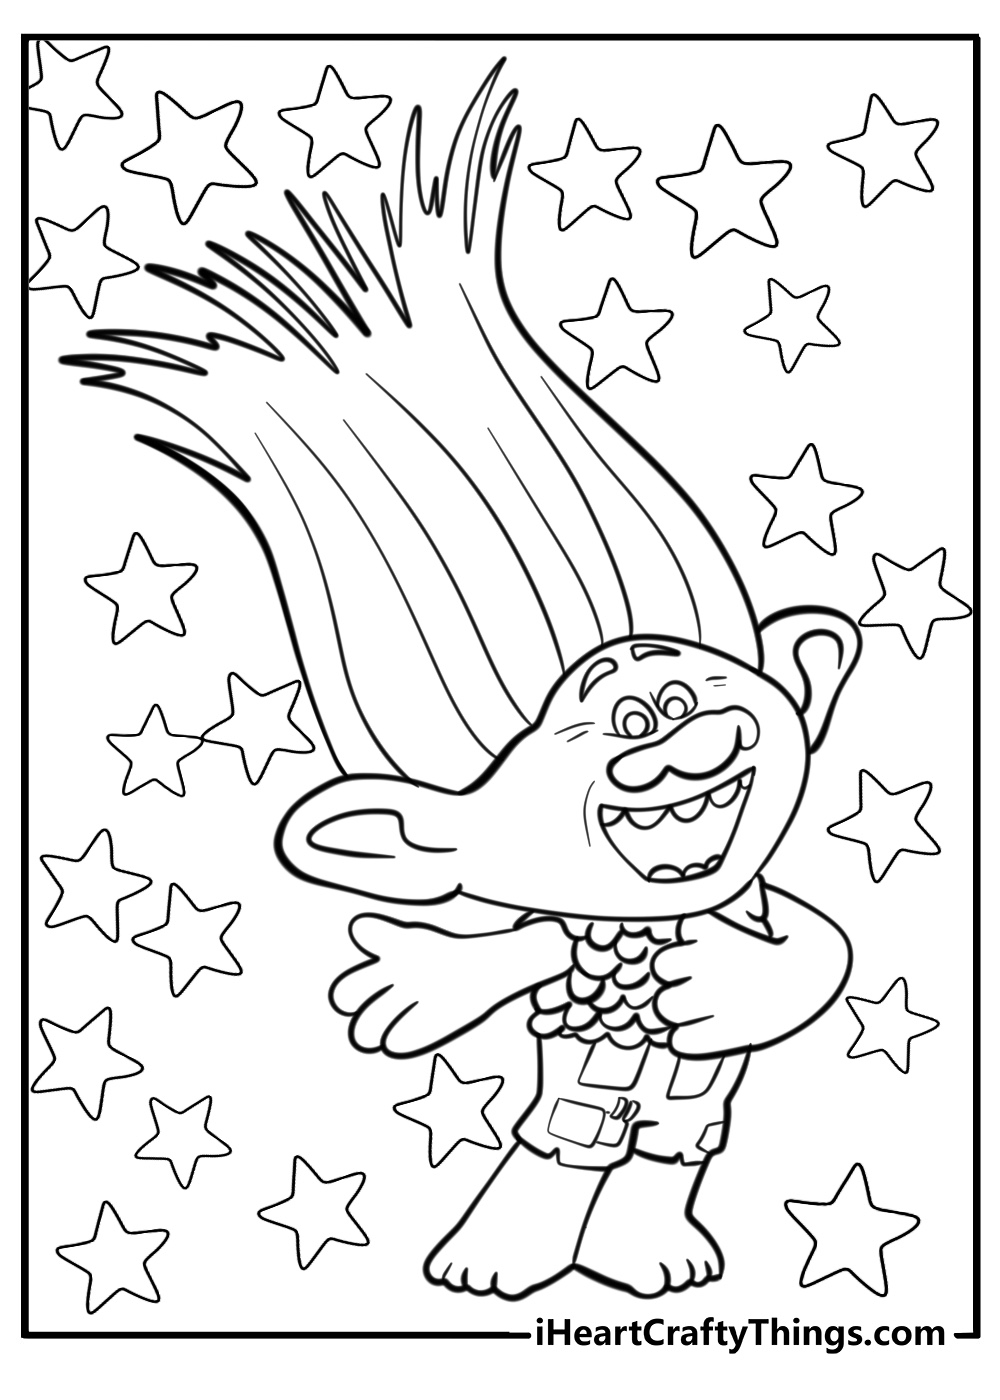 Detailed coloring page of Branch